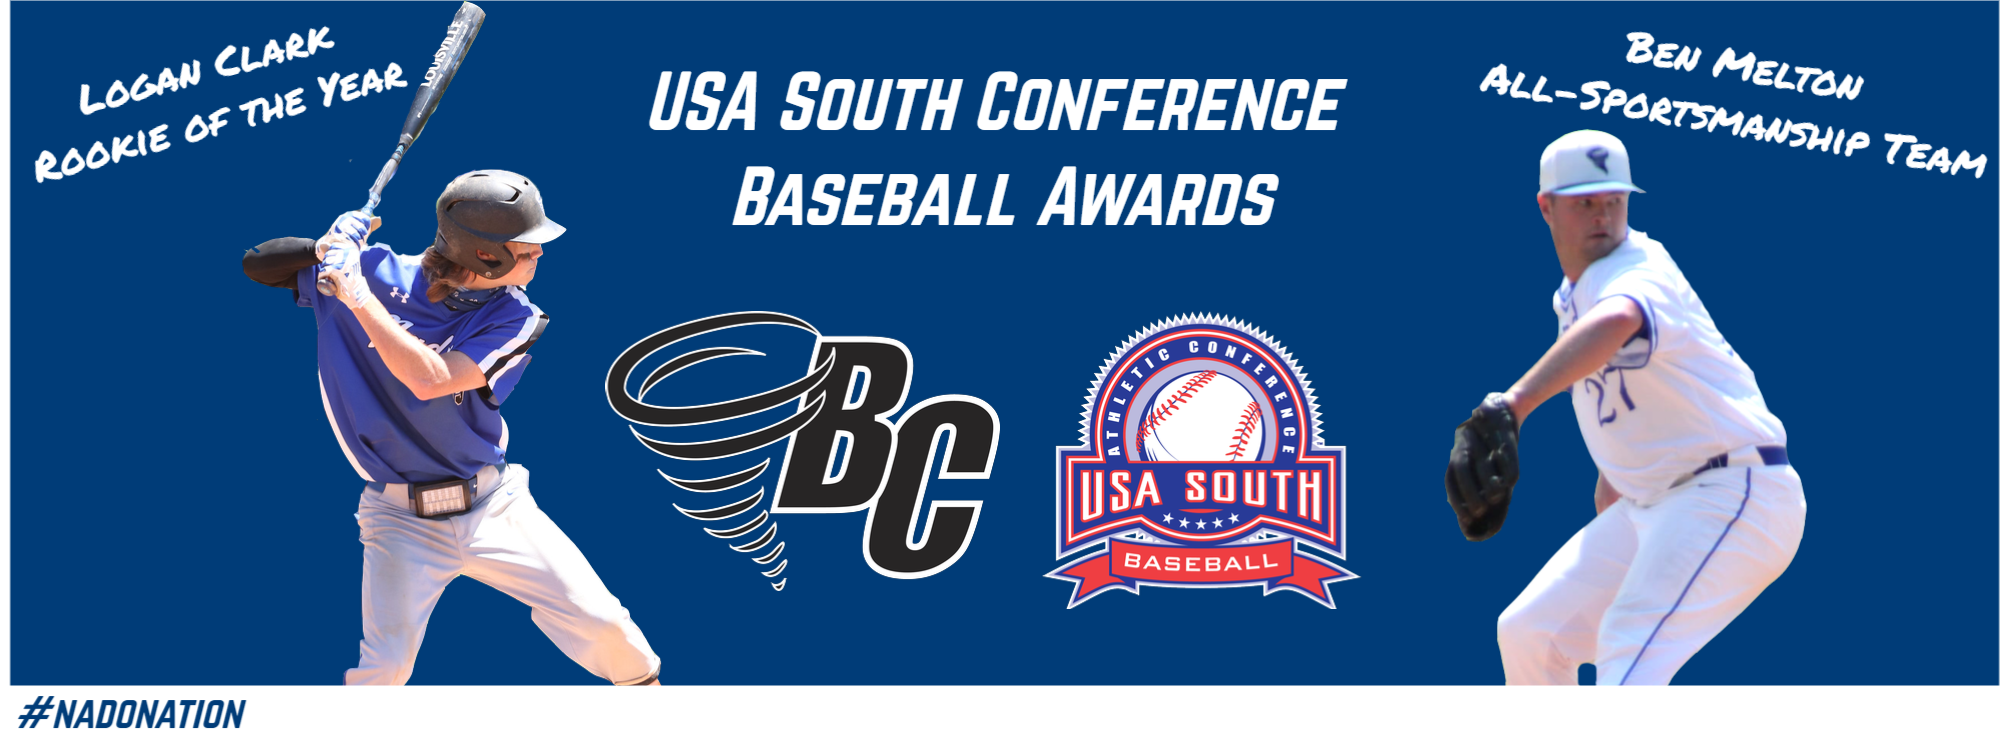 Clark Selected as Conference’s Rookie of the Year as Pair of Tornados Honored by USA South